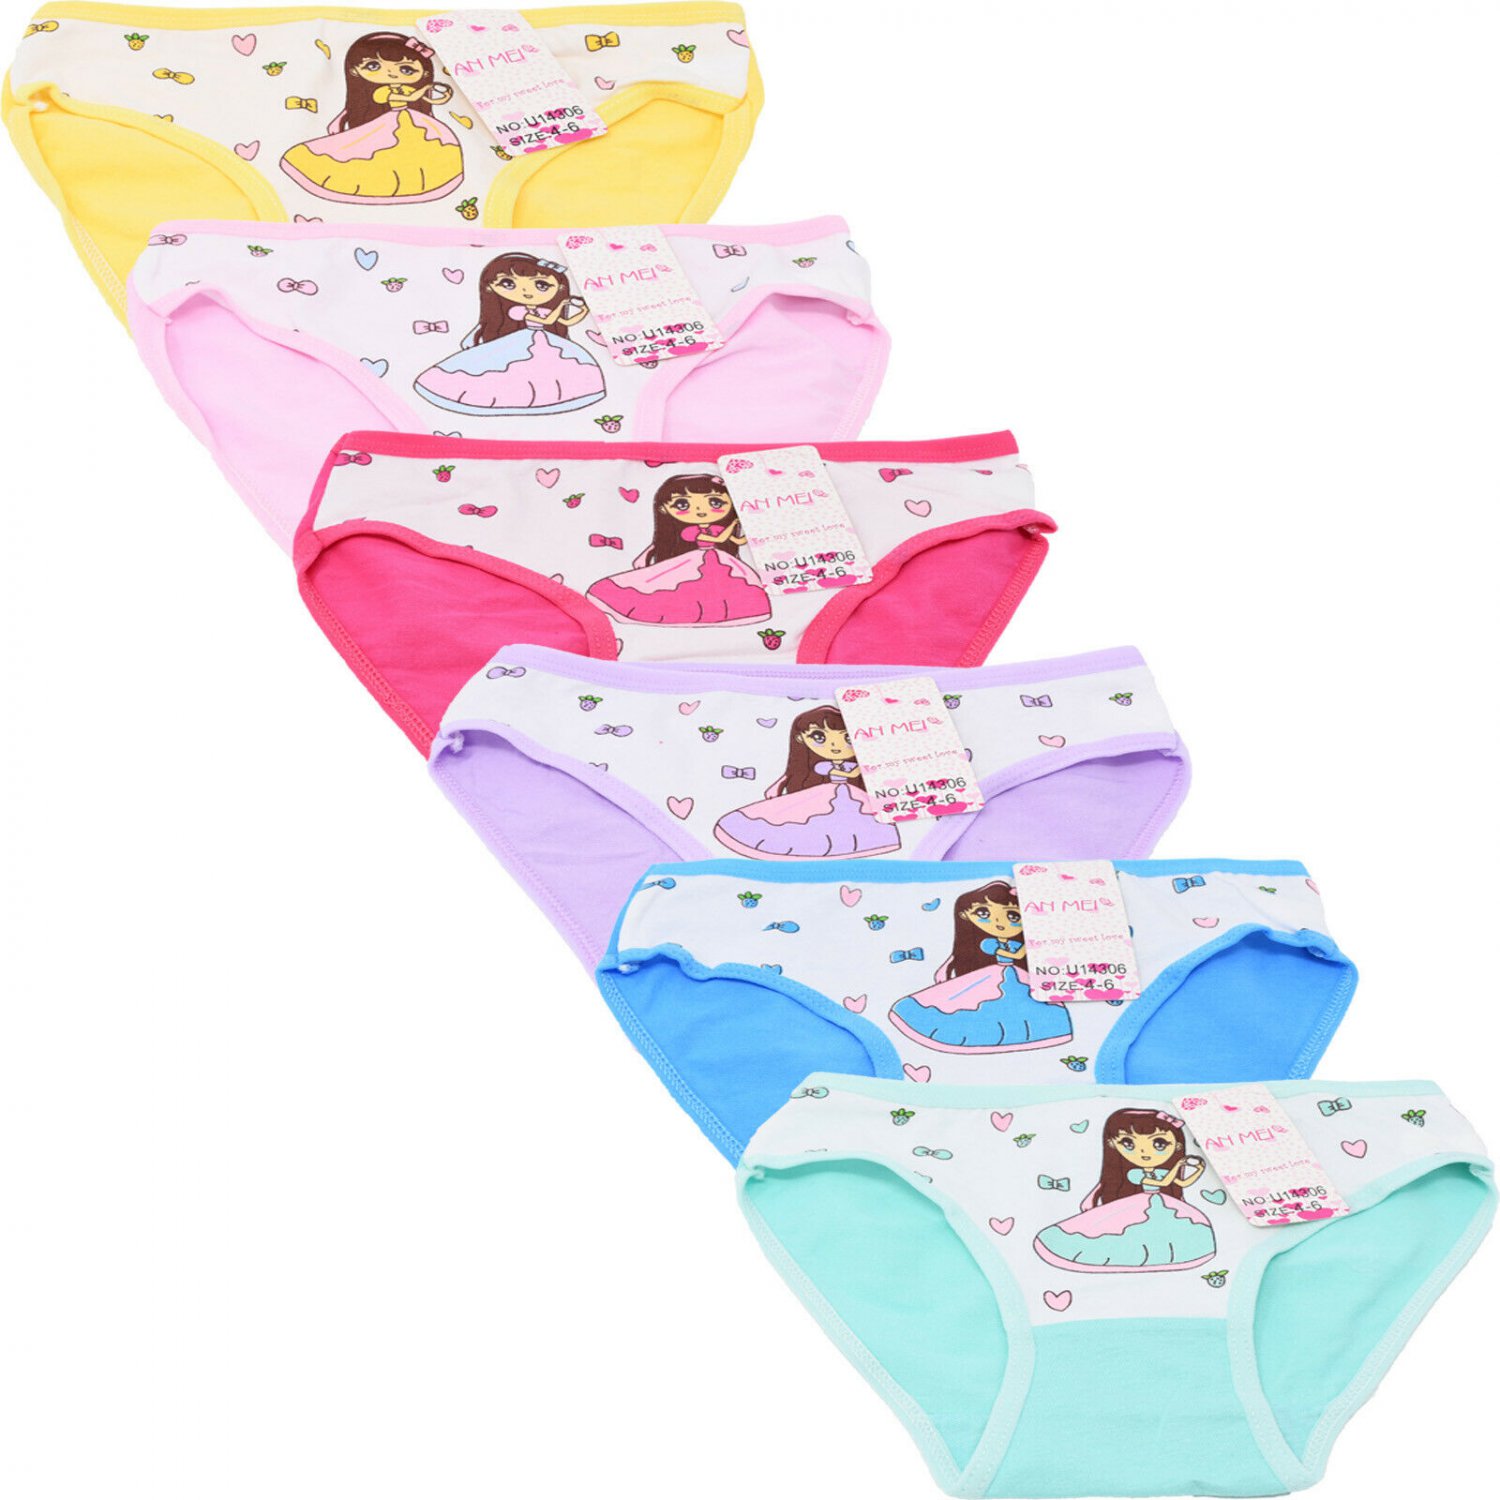 6 PC Girl's underwear Princess style 3 to choose from Ages 2-8